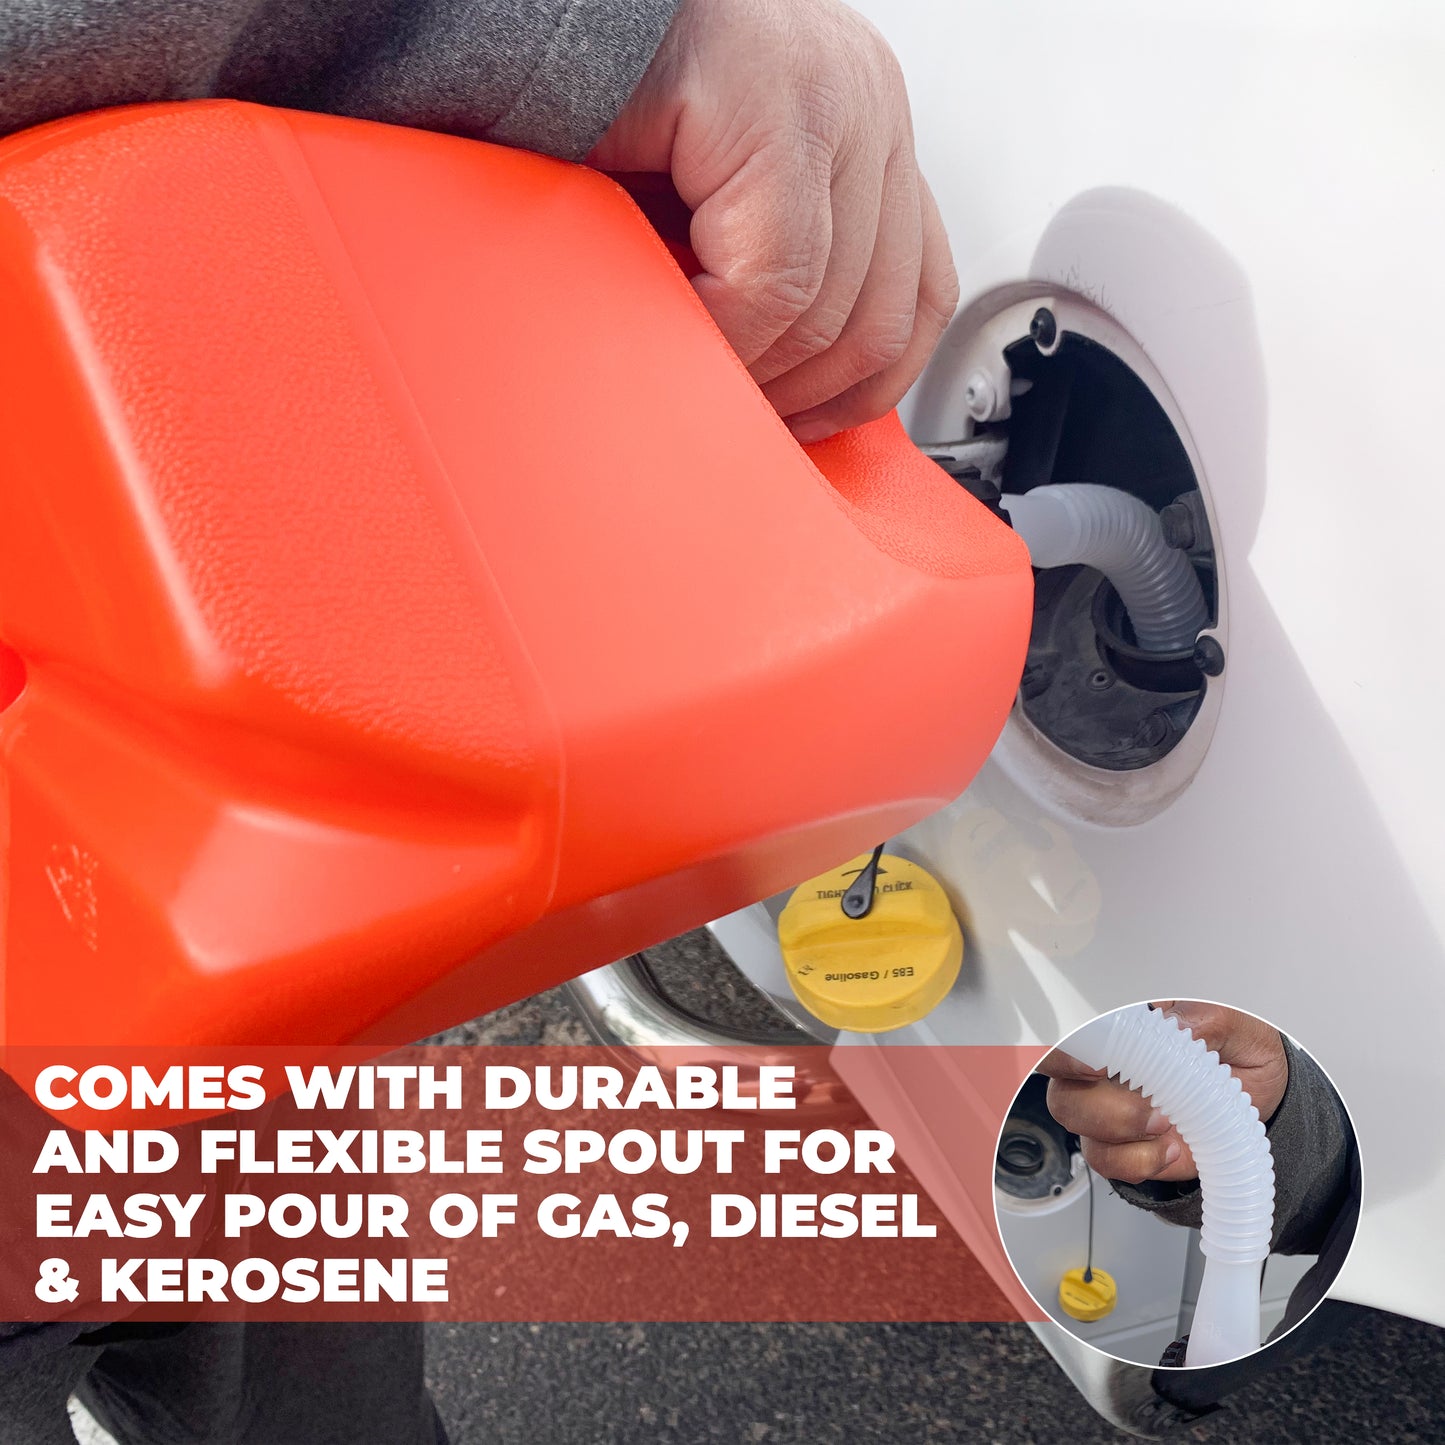 KP KOOL PRODUCTS 1 gallon plastic can - 1 gallon gas jug -  1 gallon gas can in your favorite color of choice. - Kool Products